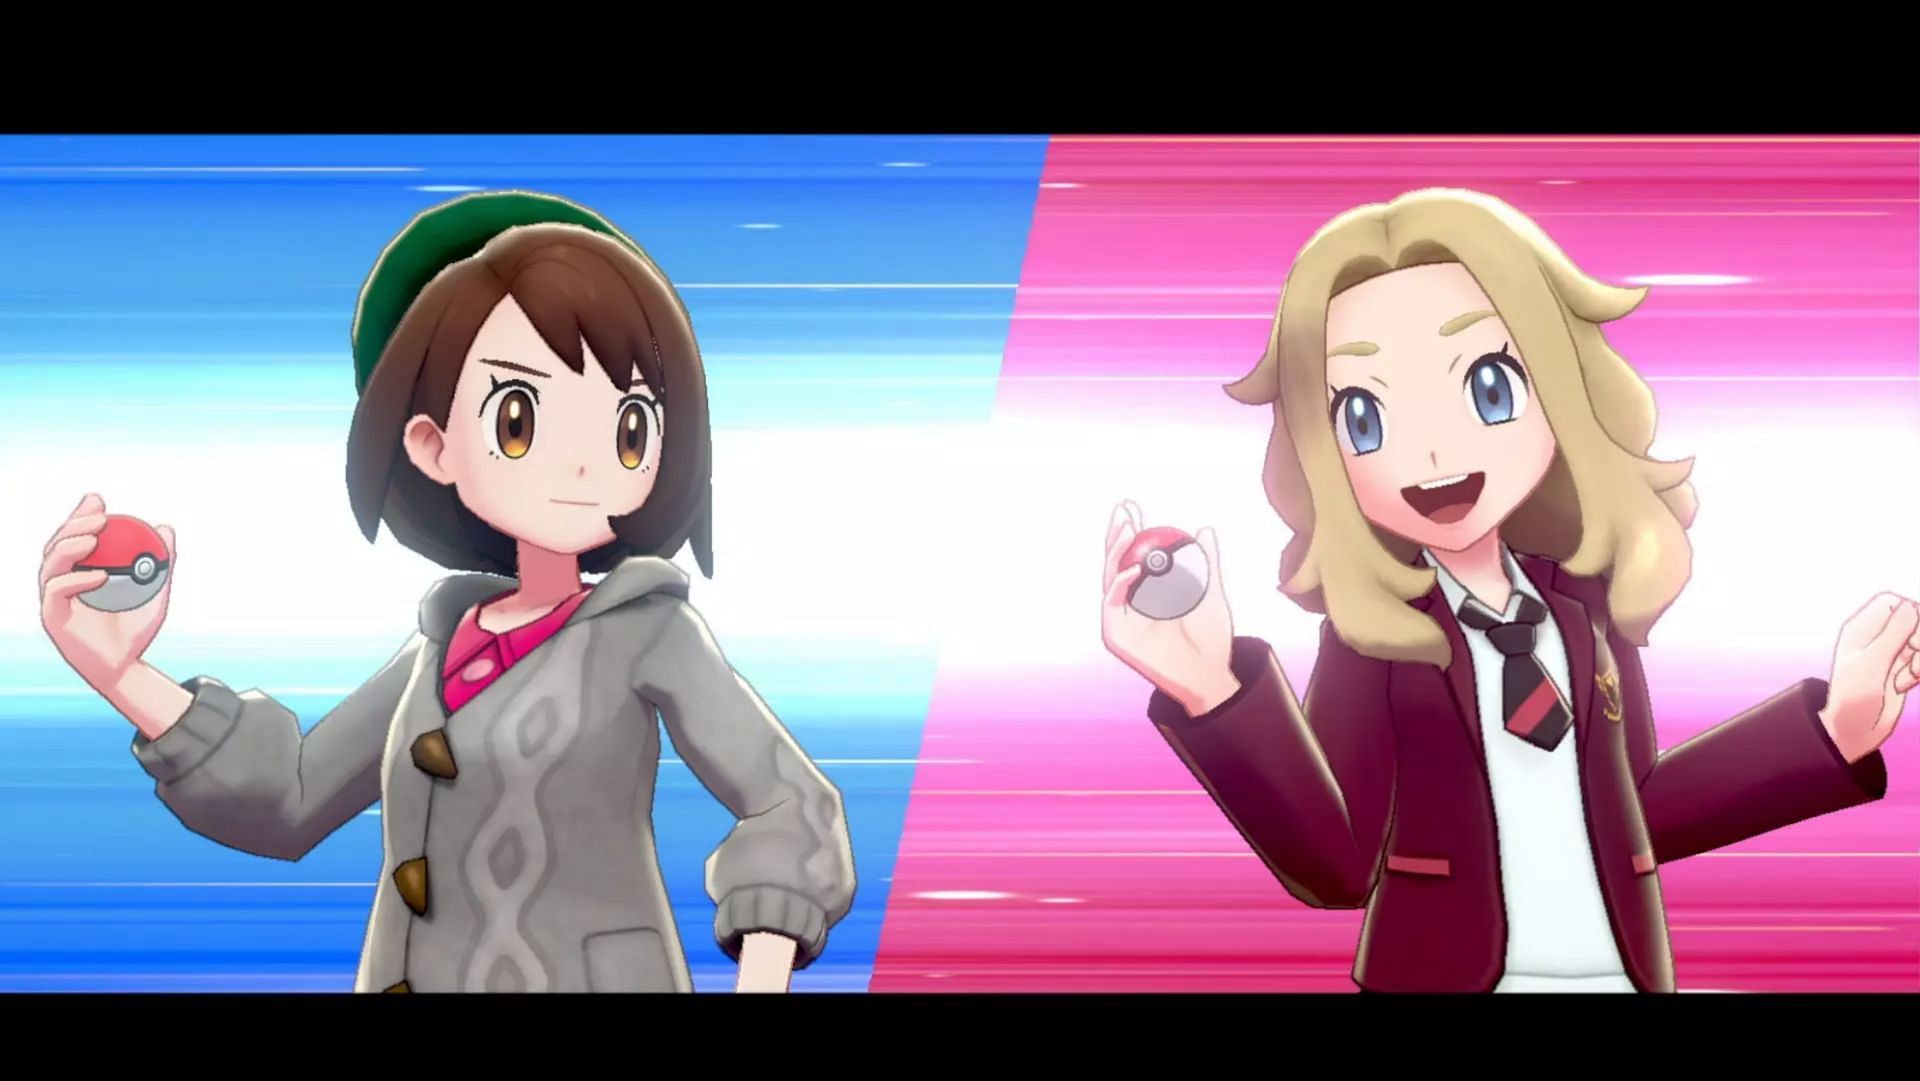 Pokemon Sword and Shield's Online Updates to End Next Month - CNET